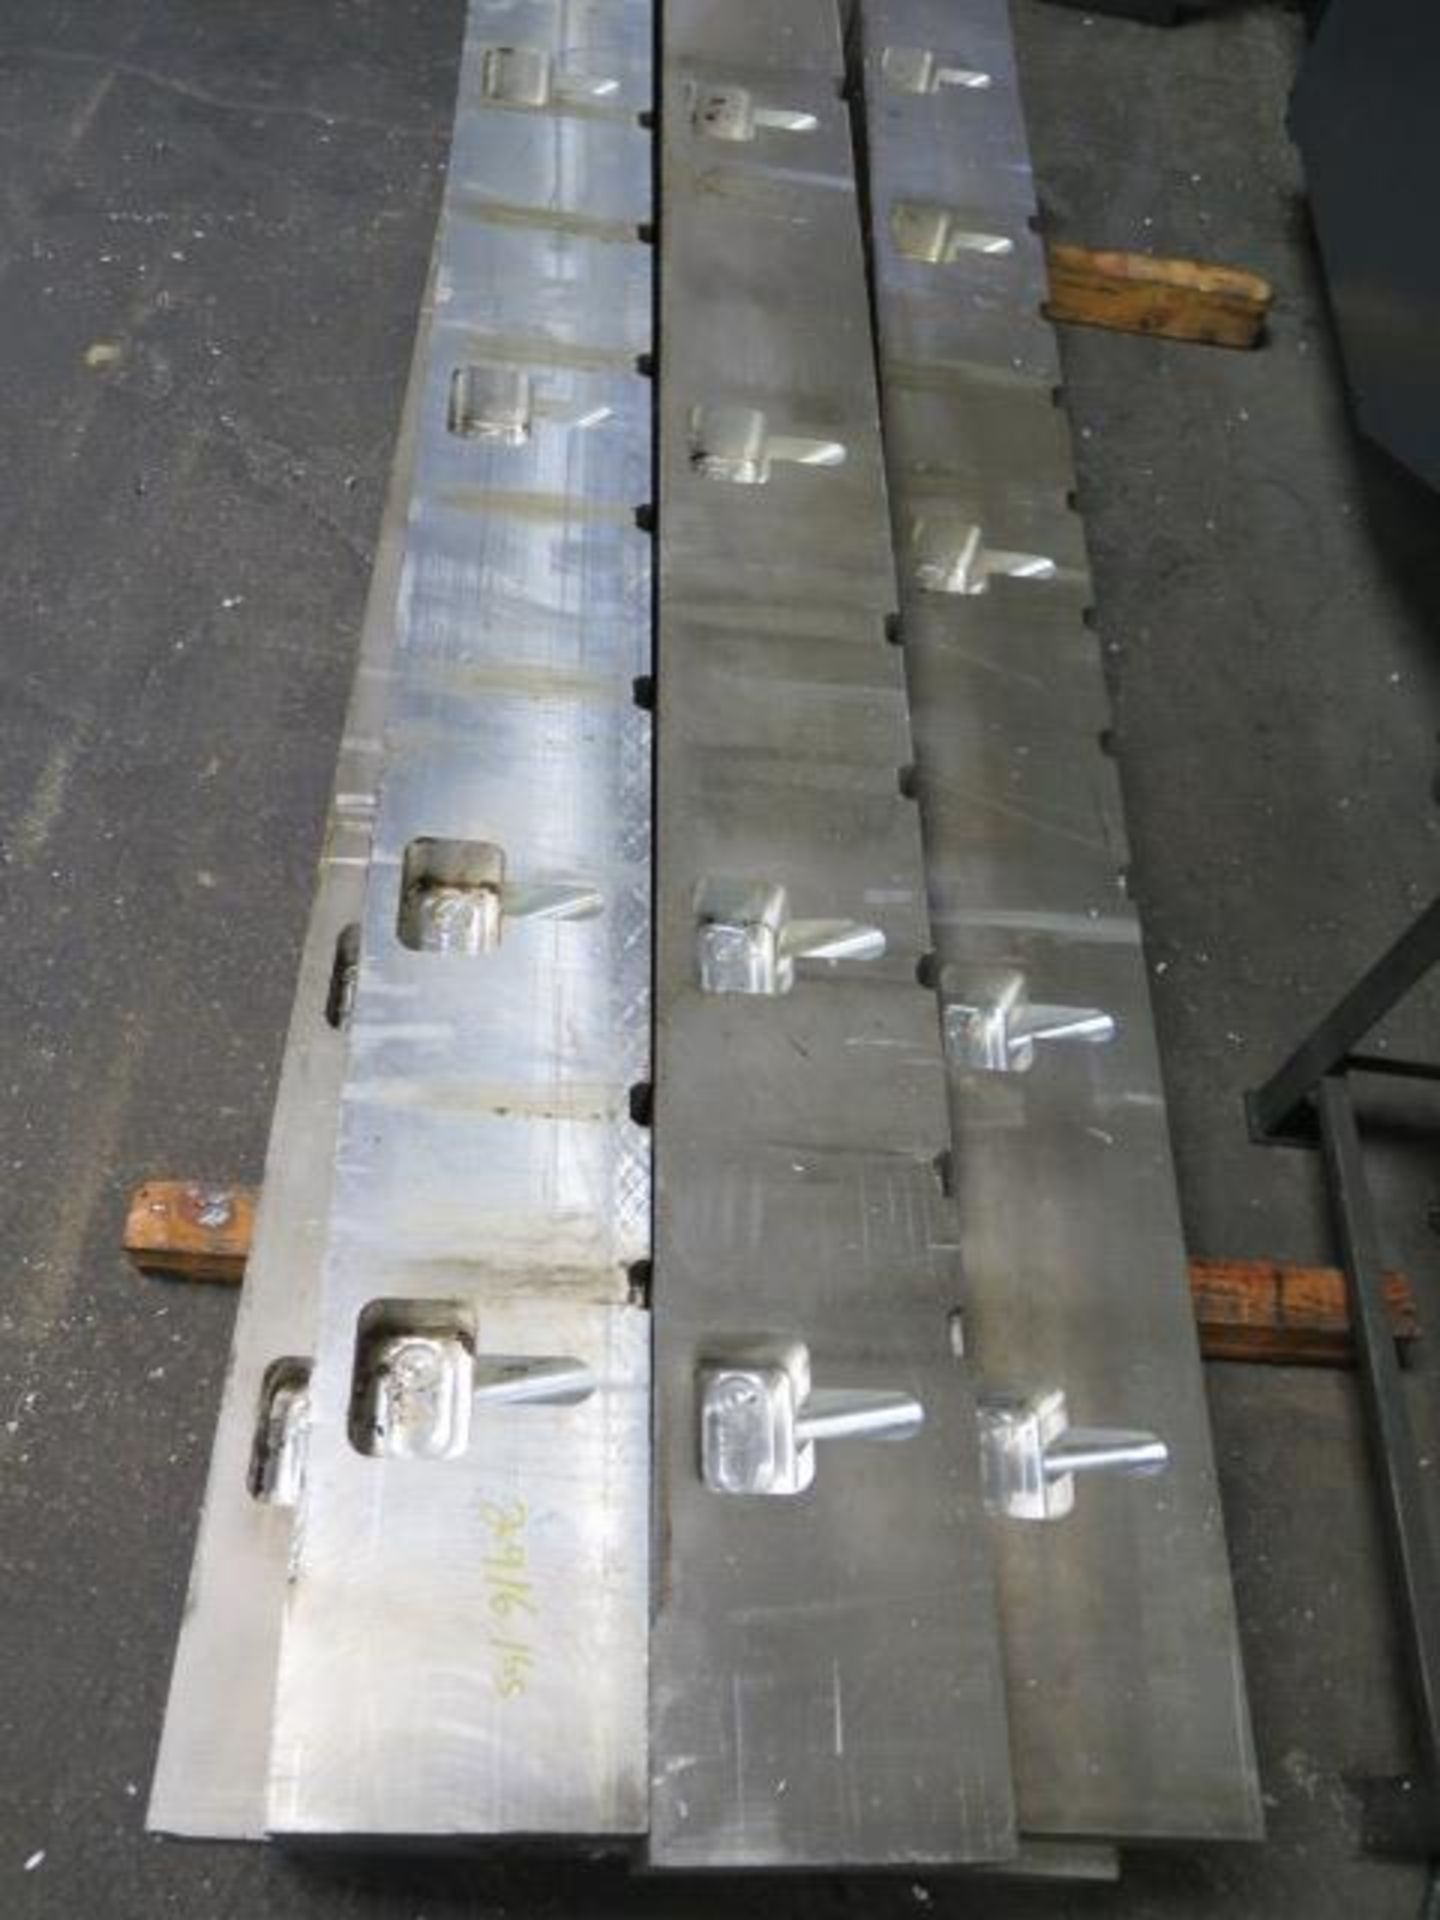 5" x 8 1/2" x 90" Aluminum Riser Blocks (8) (SOLD AS-IS - NO WARRANTY) - Image 4 of 5